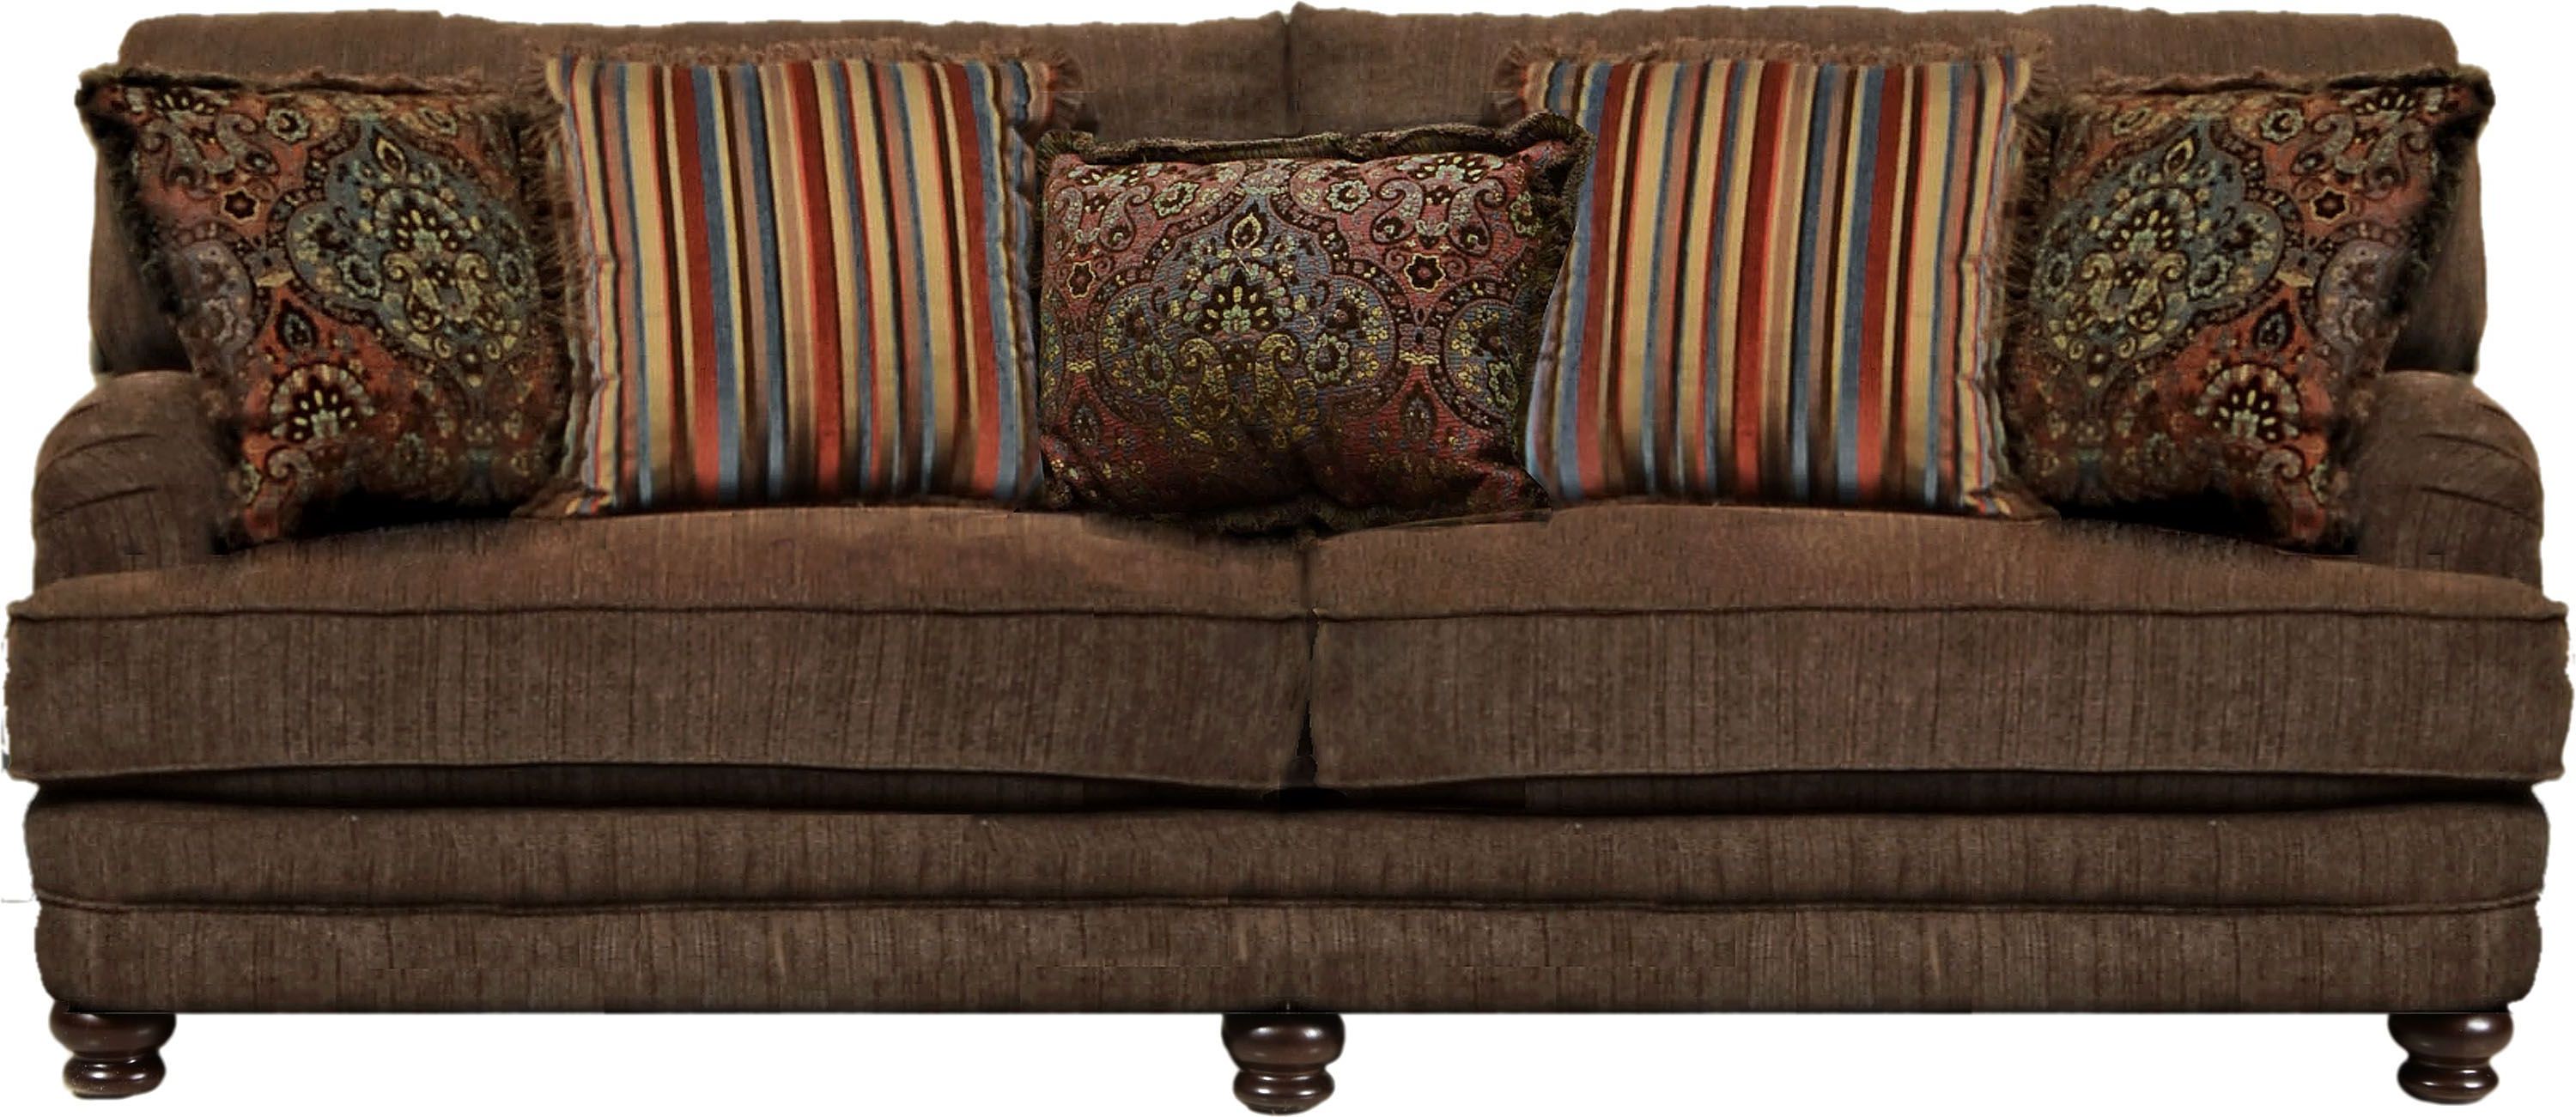 Traditional Sofa Sets Intended For Well Known Brennan Sofa Chairs (View 4 of 20)